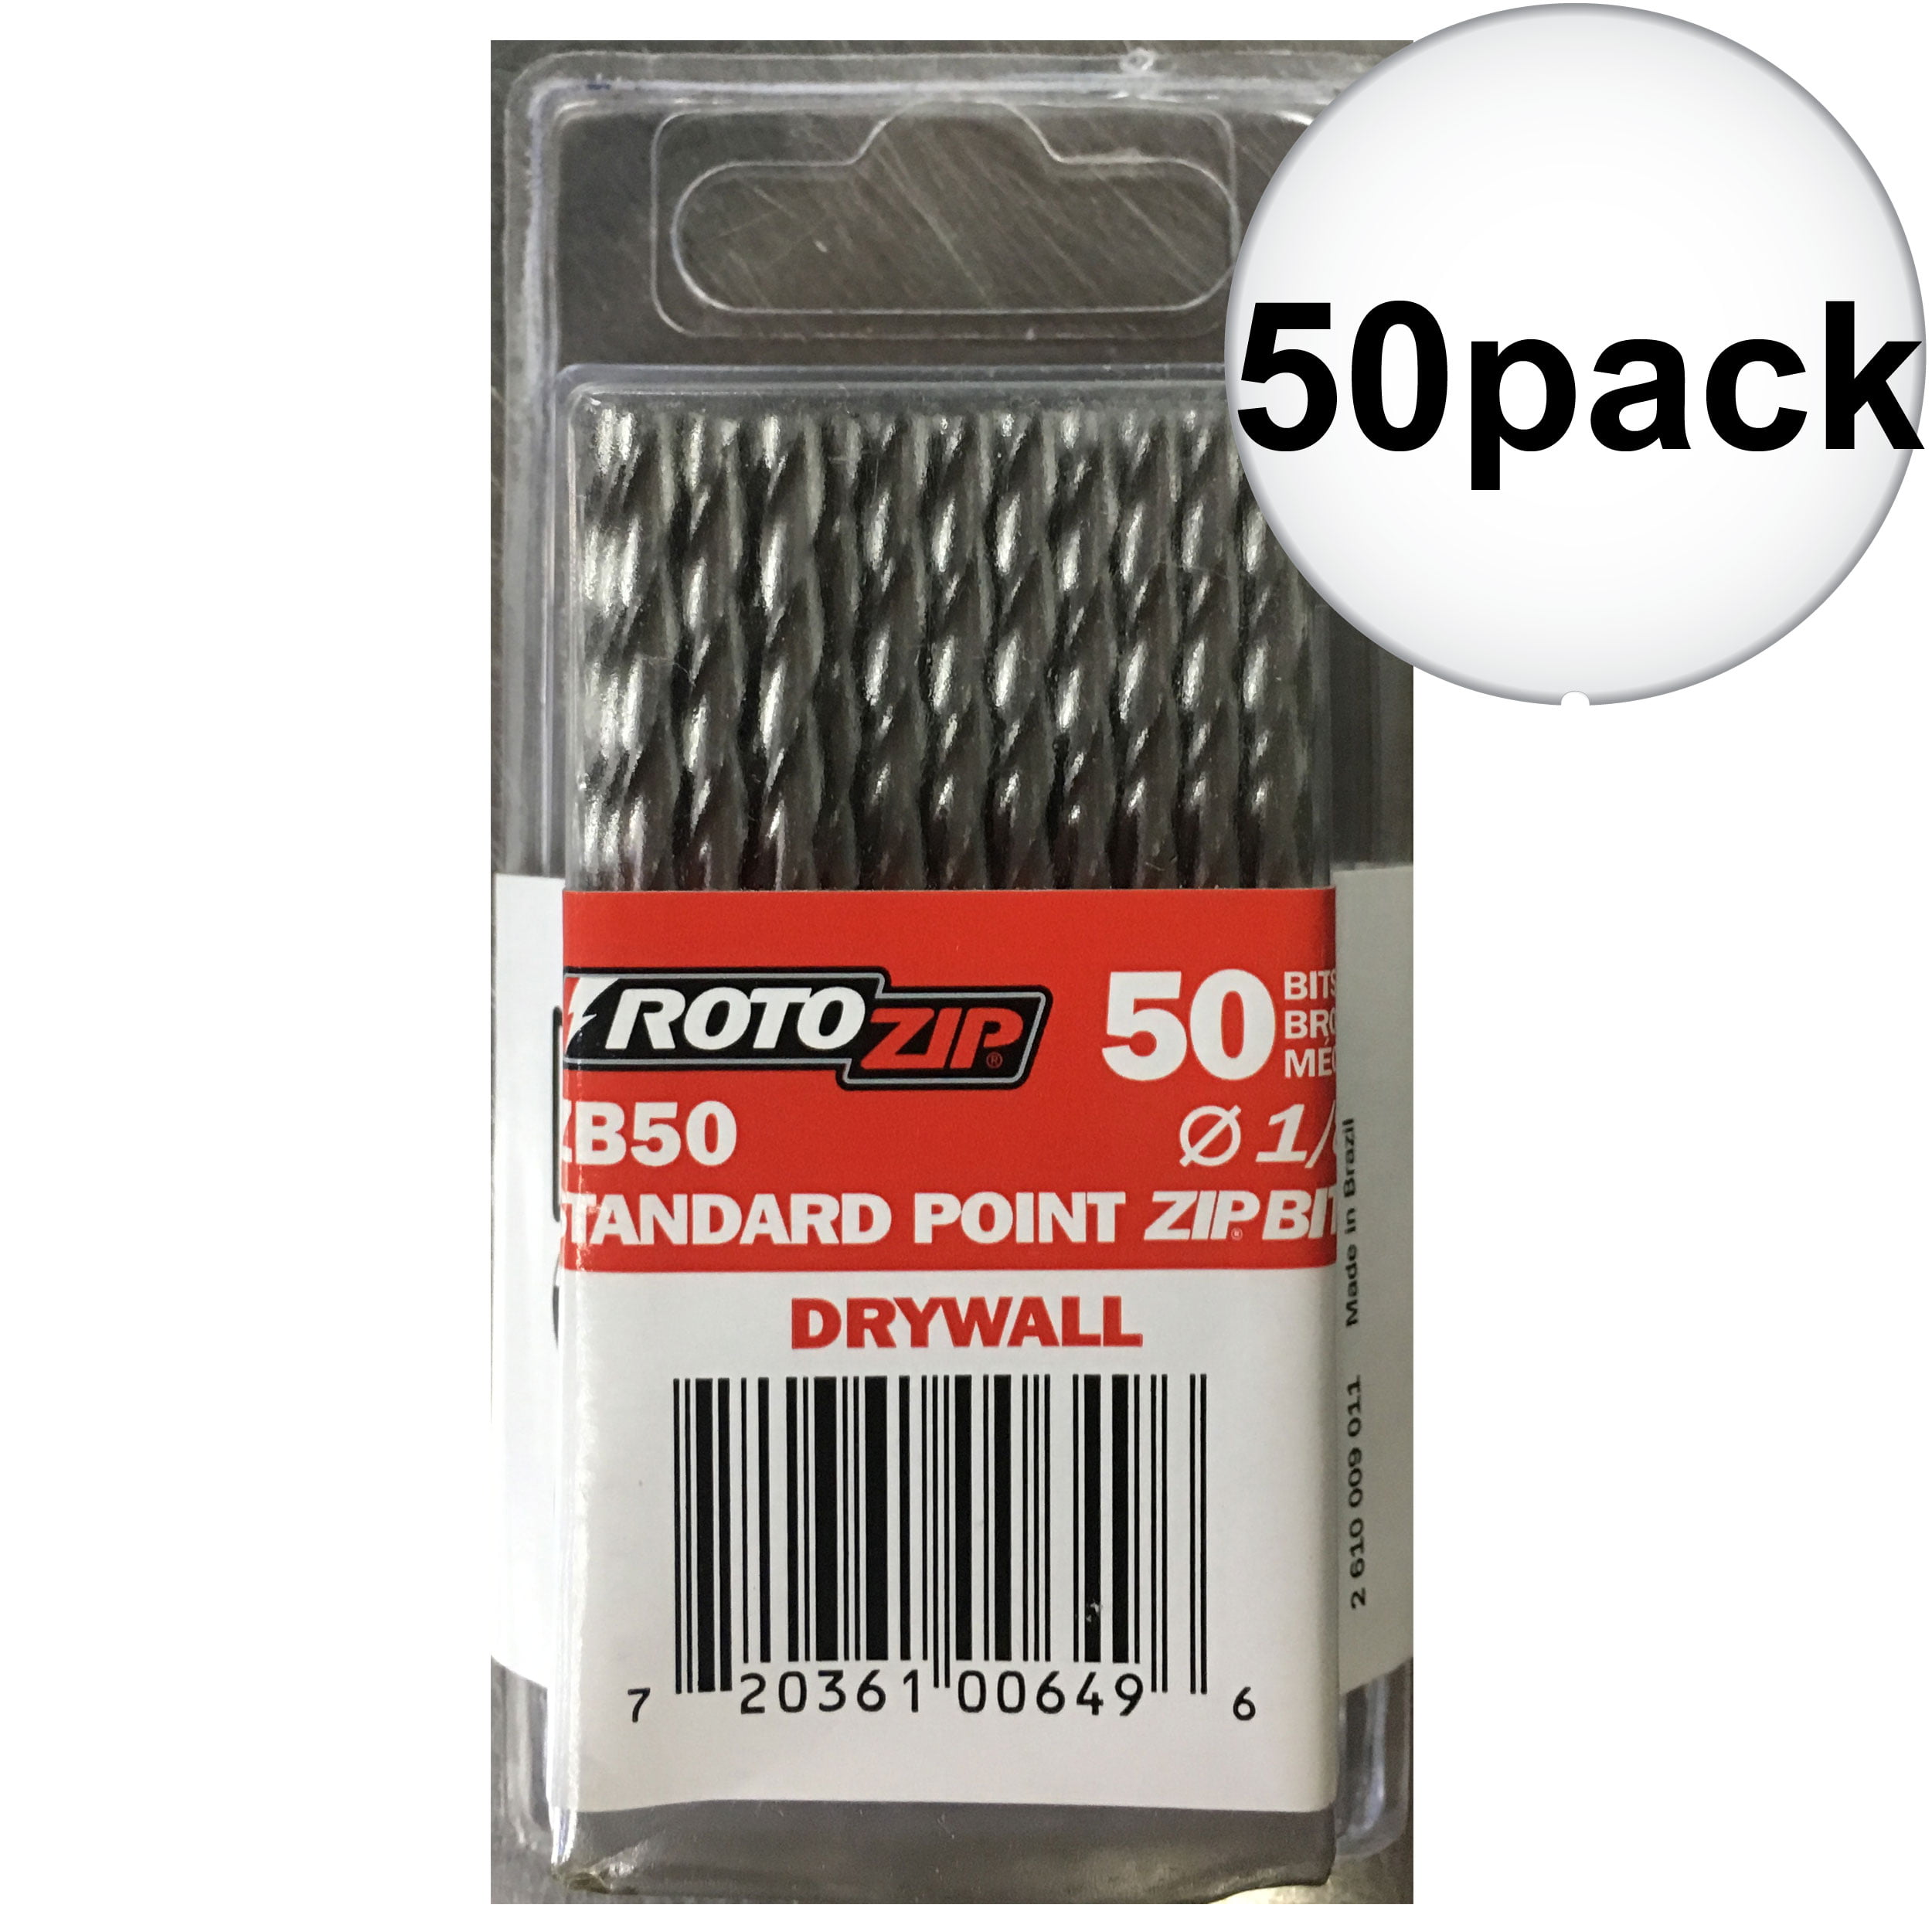 Pack of 50 for sale online RotoZip ZB50 Standard Point Bit 